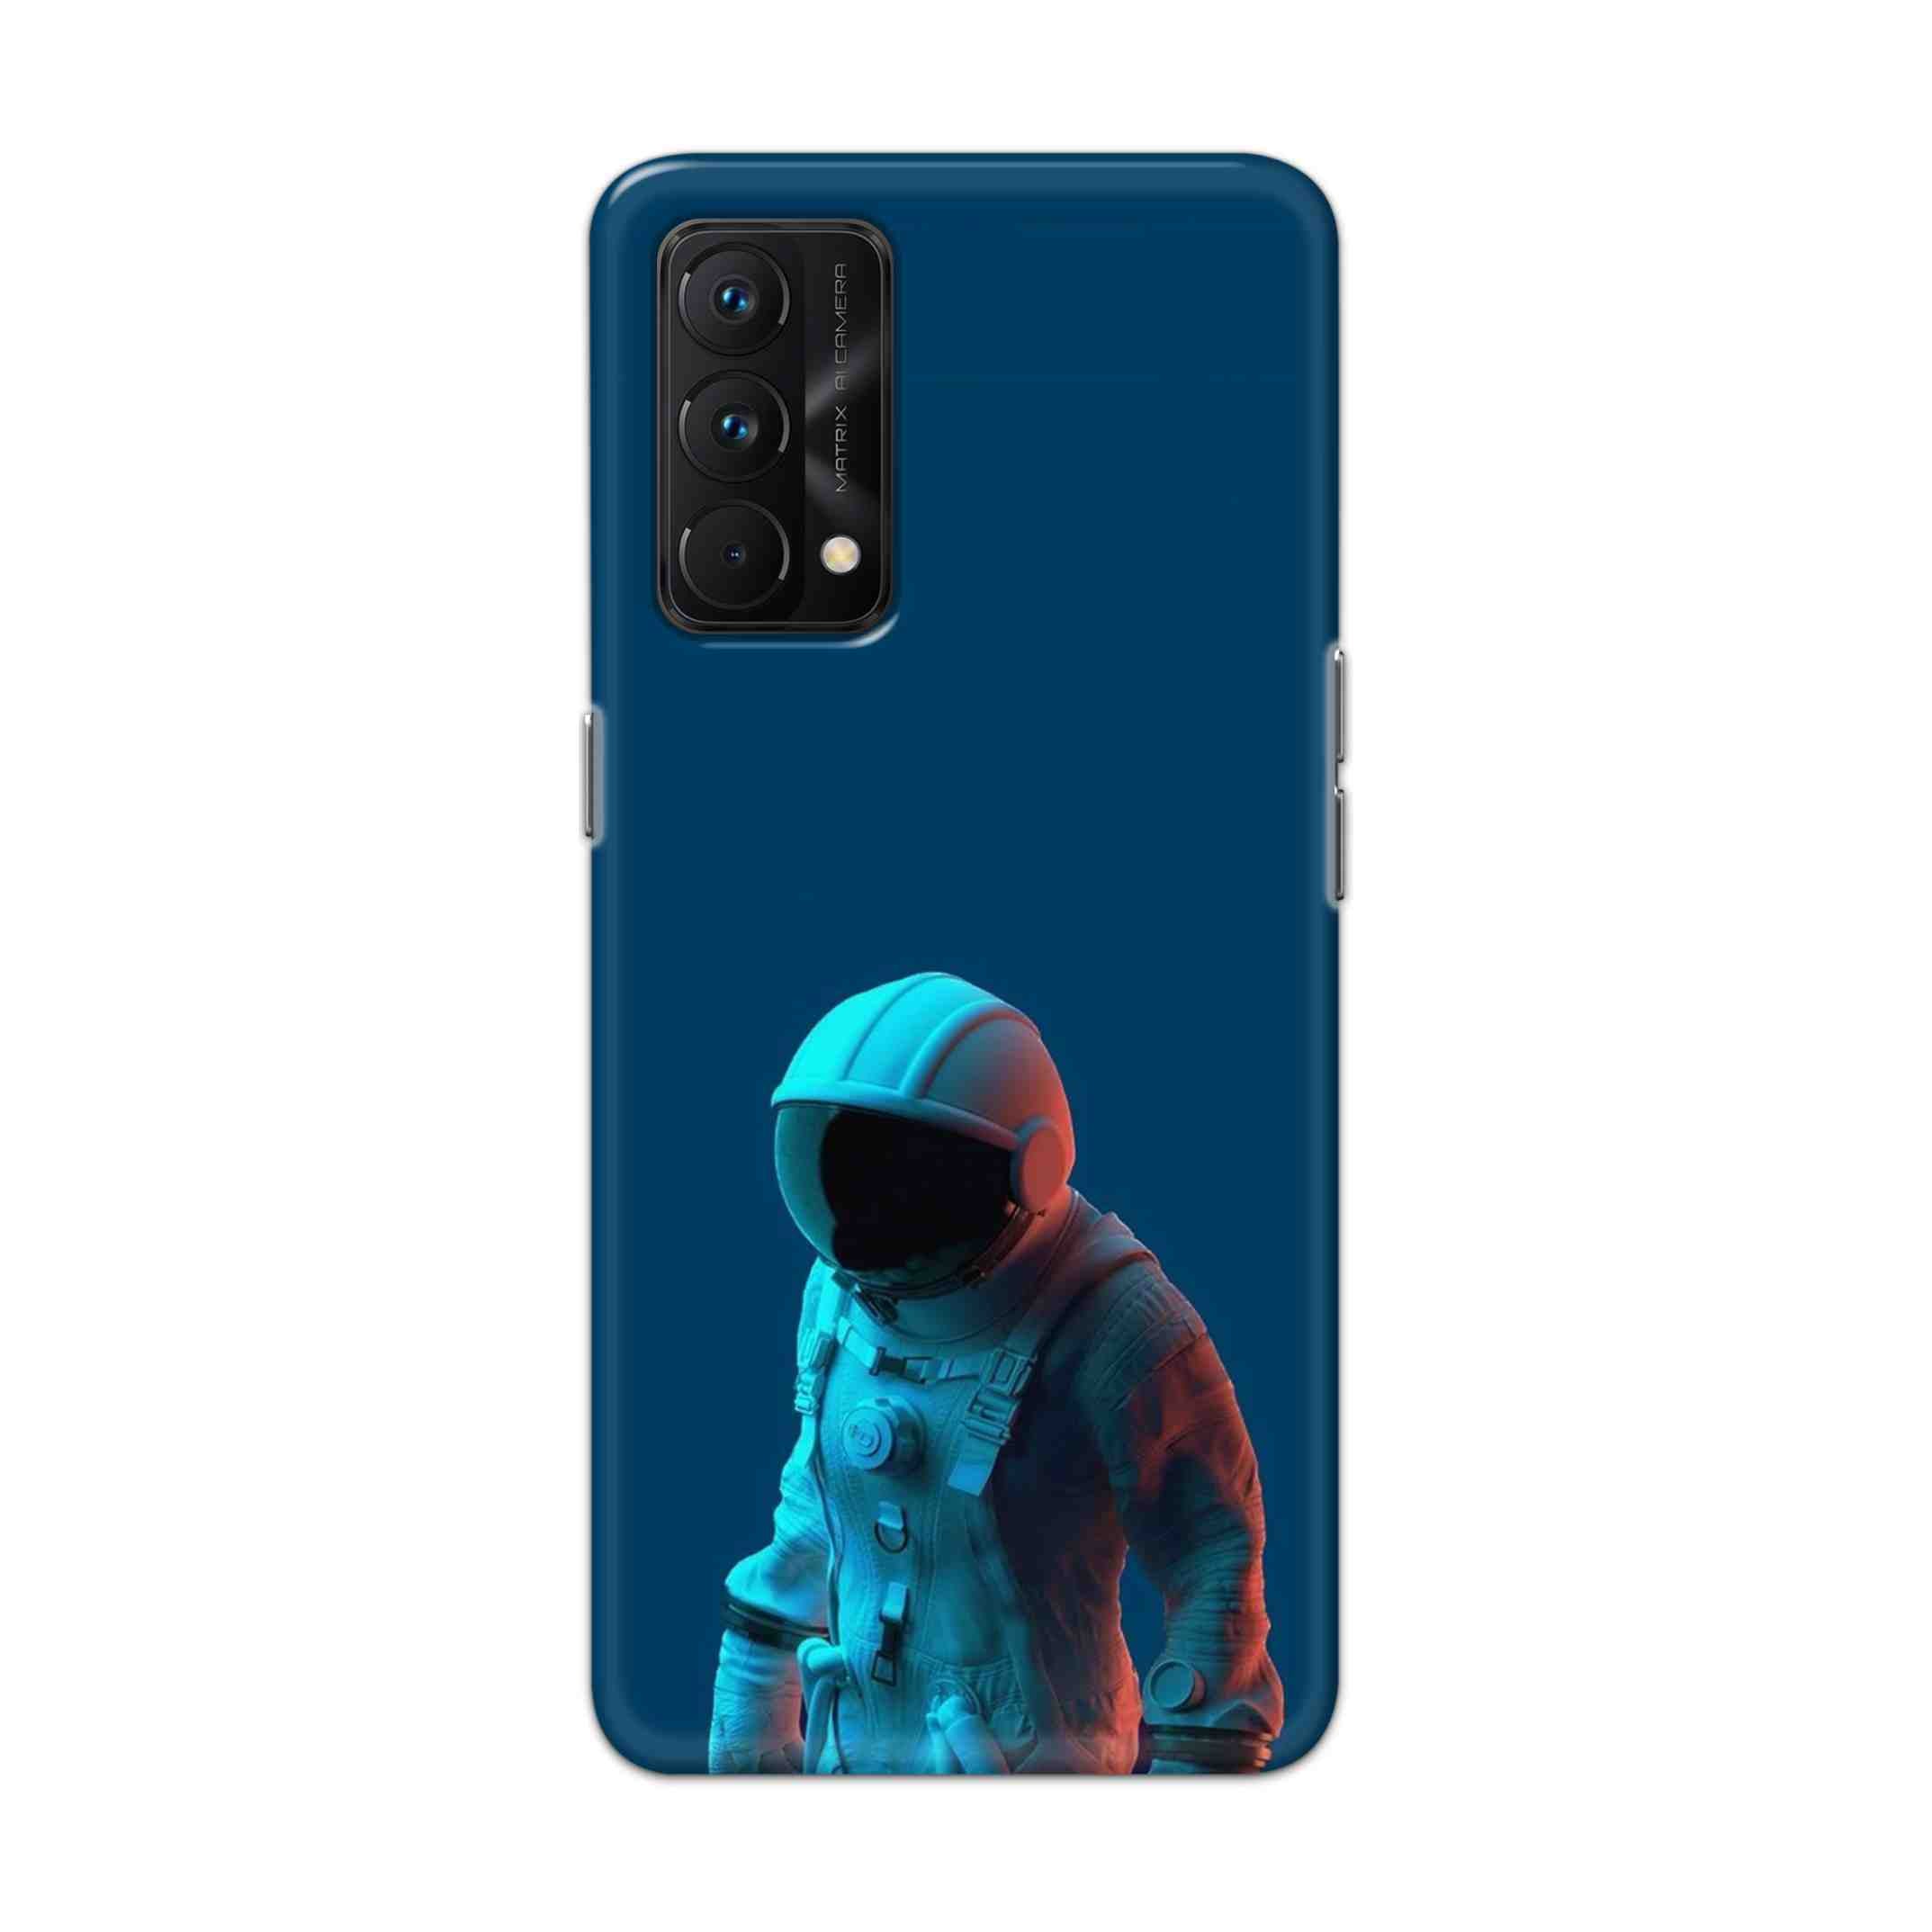 Buy Blue Astronaut Hard Back Mobile Phone Case Cover For Realme GT Master Online